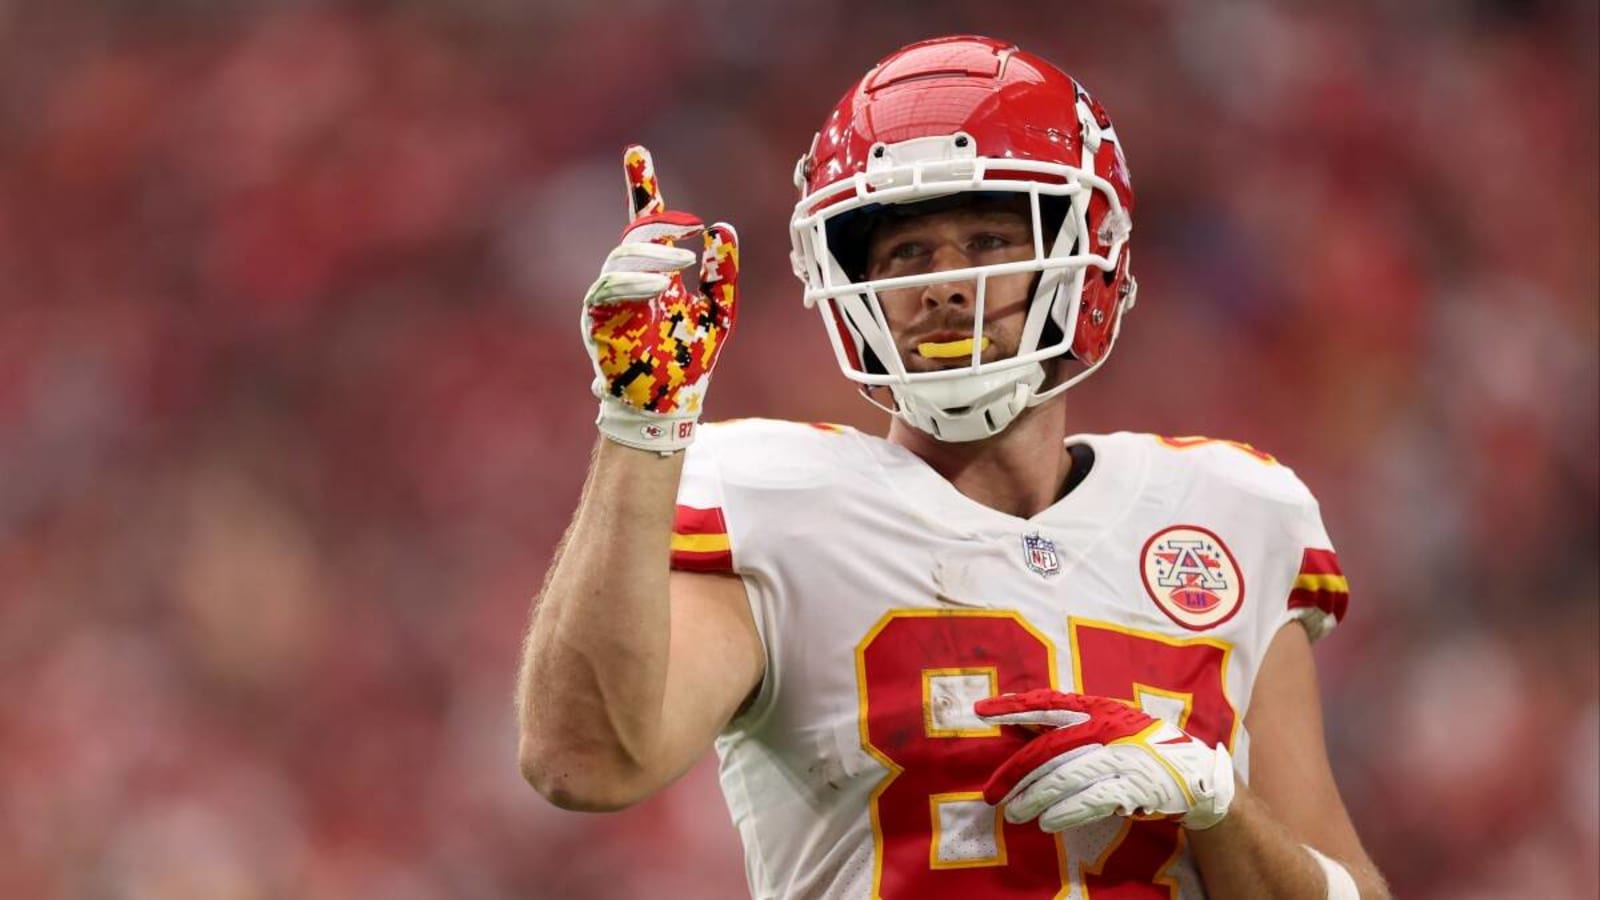 NFL player props for Saturday AFC Divisional game: Chiefs vs